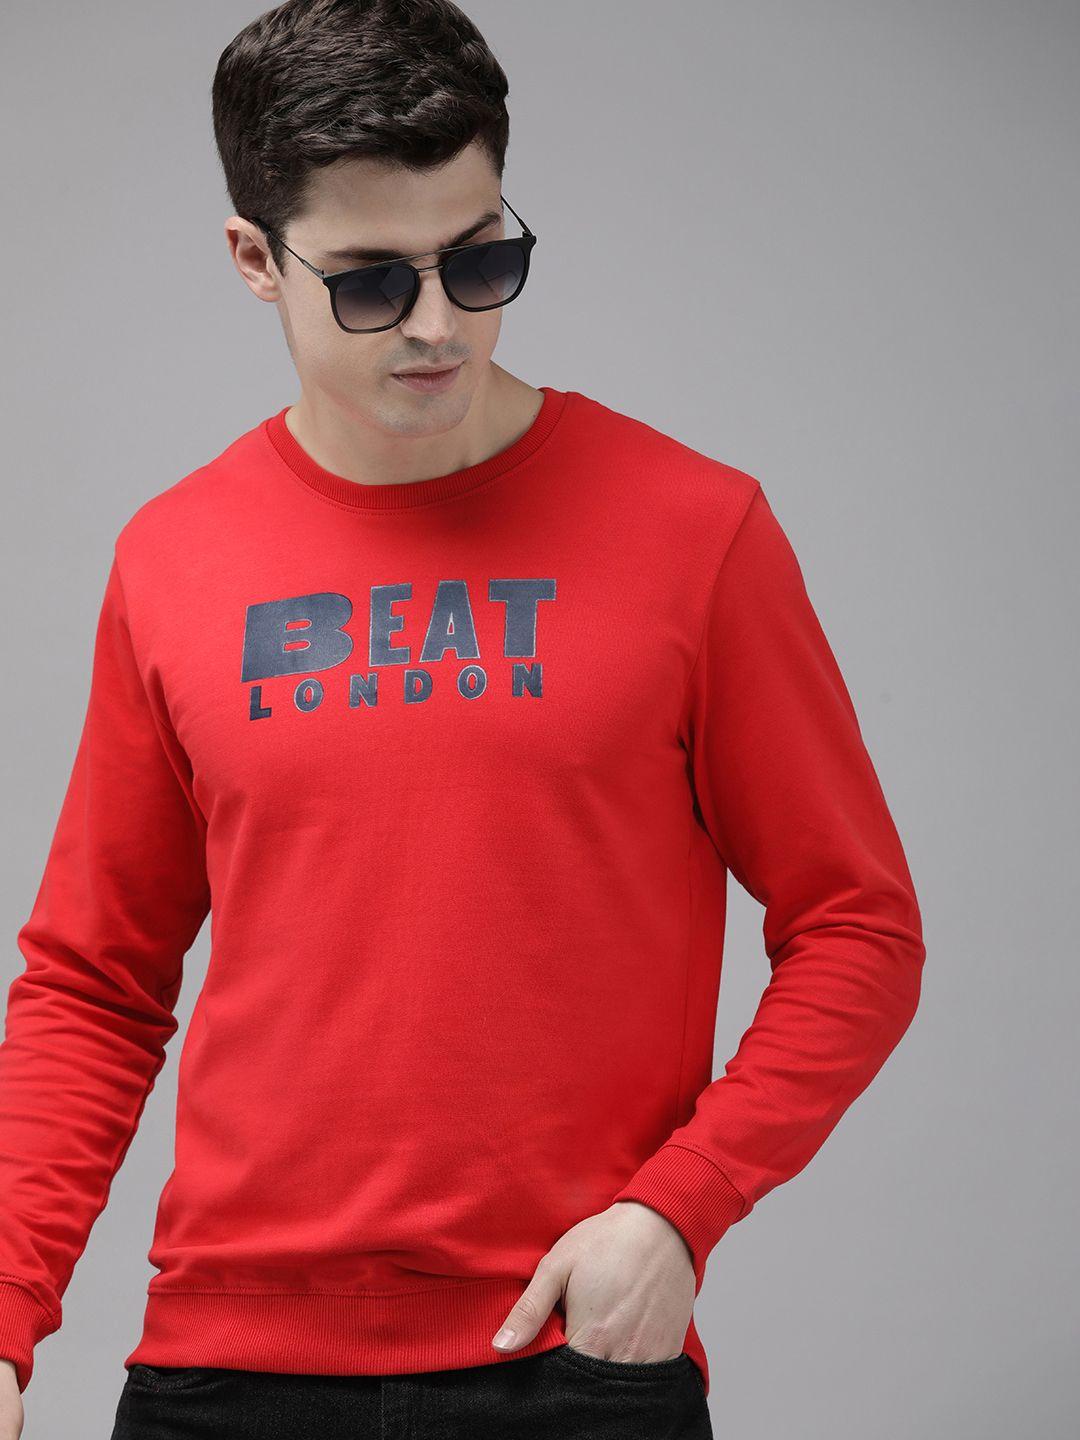 beat london by pepe jeans pure cotton brand logo printed pullover sweatshirt